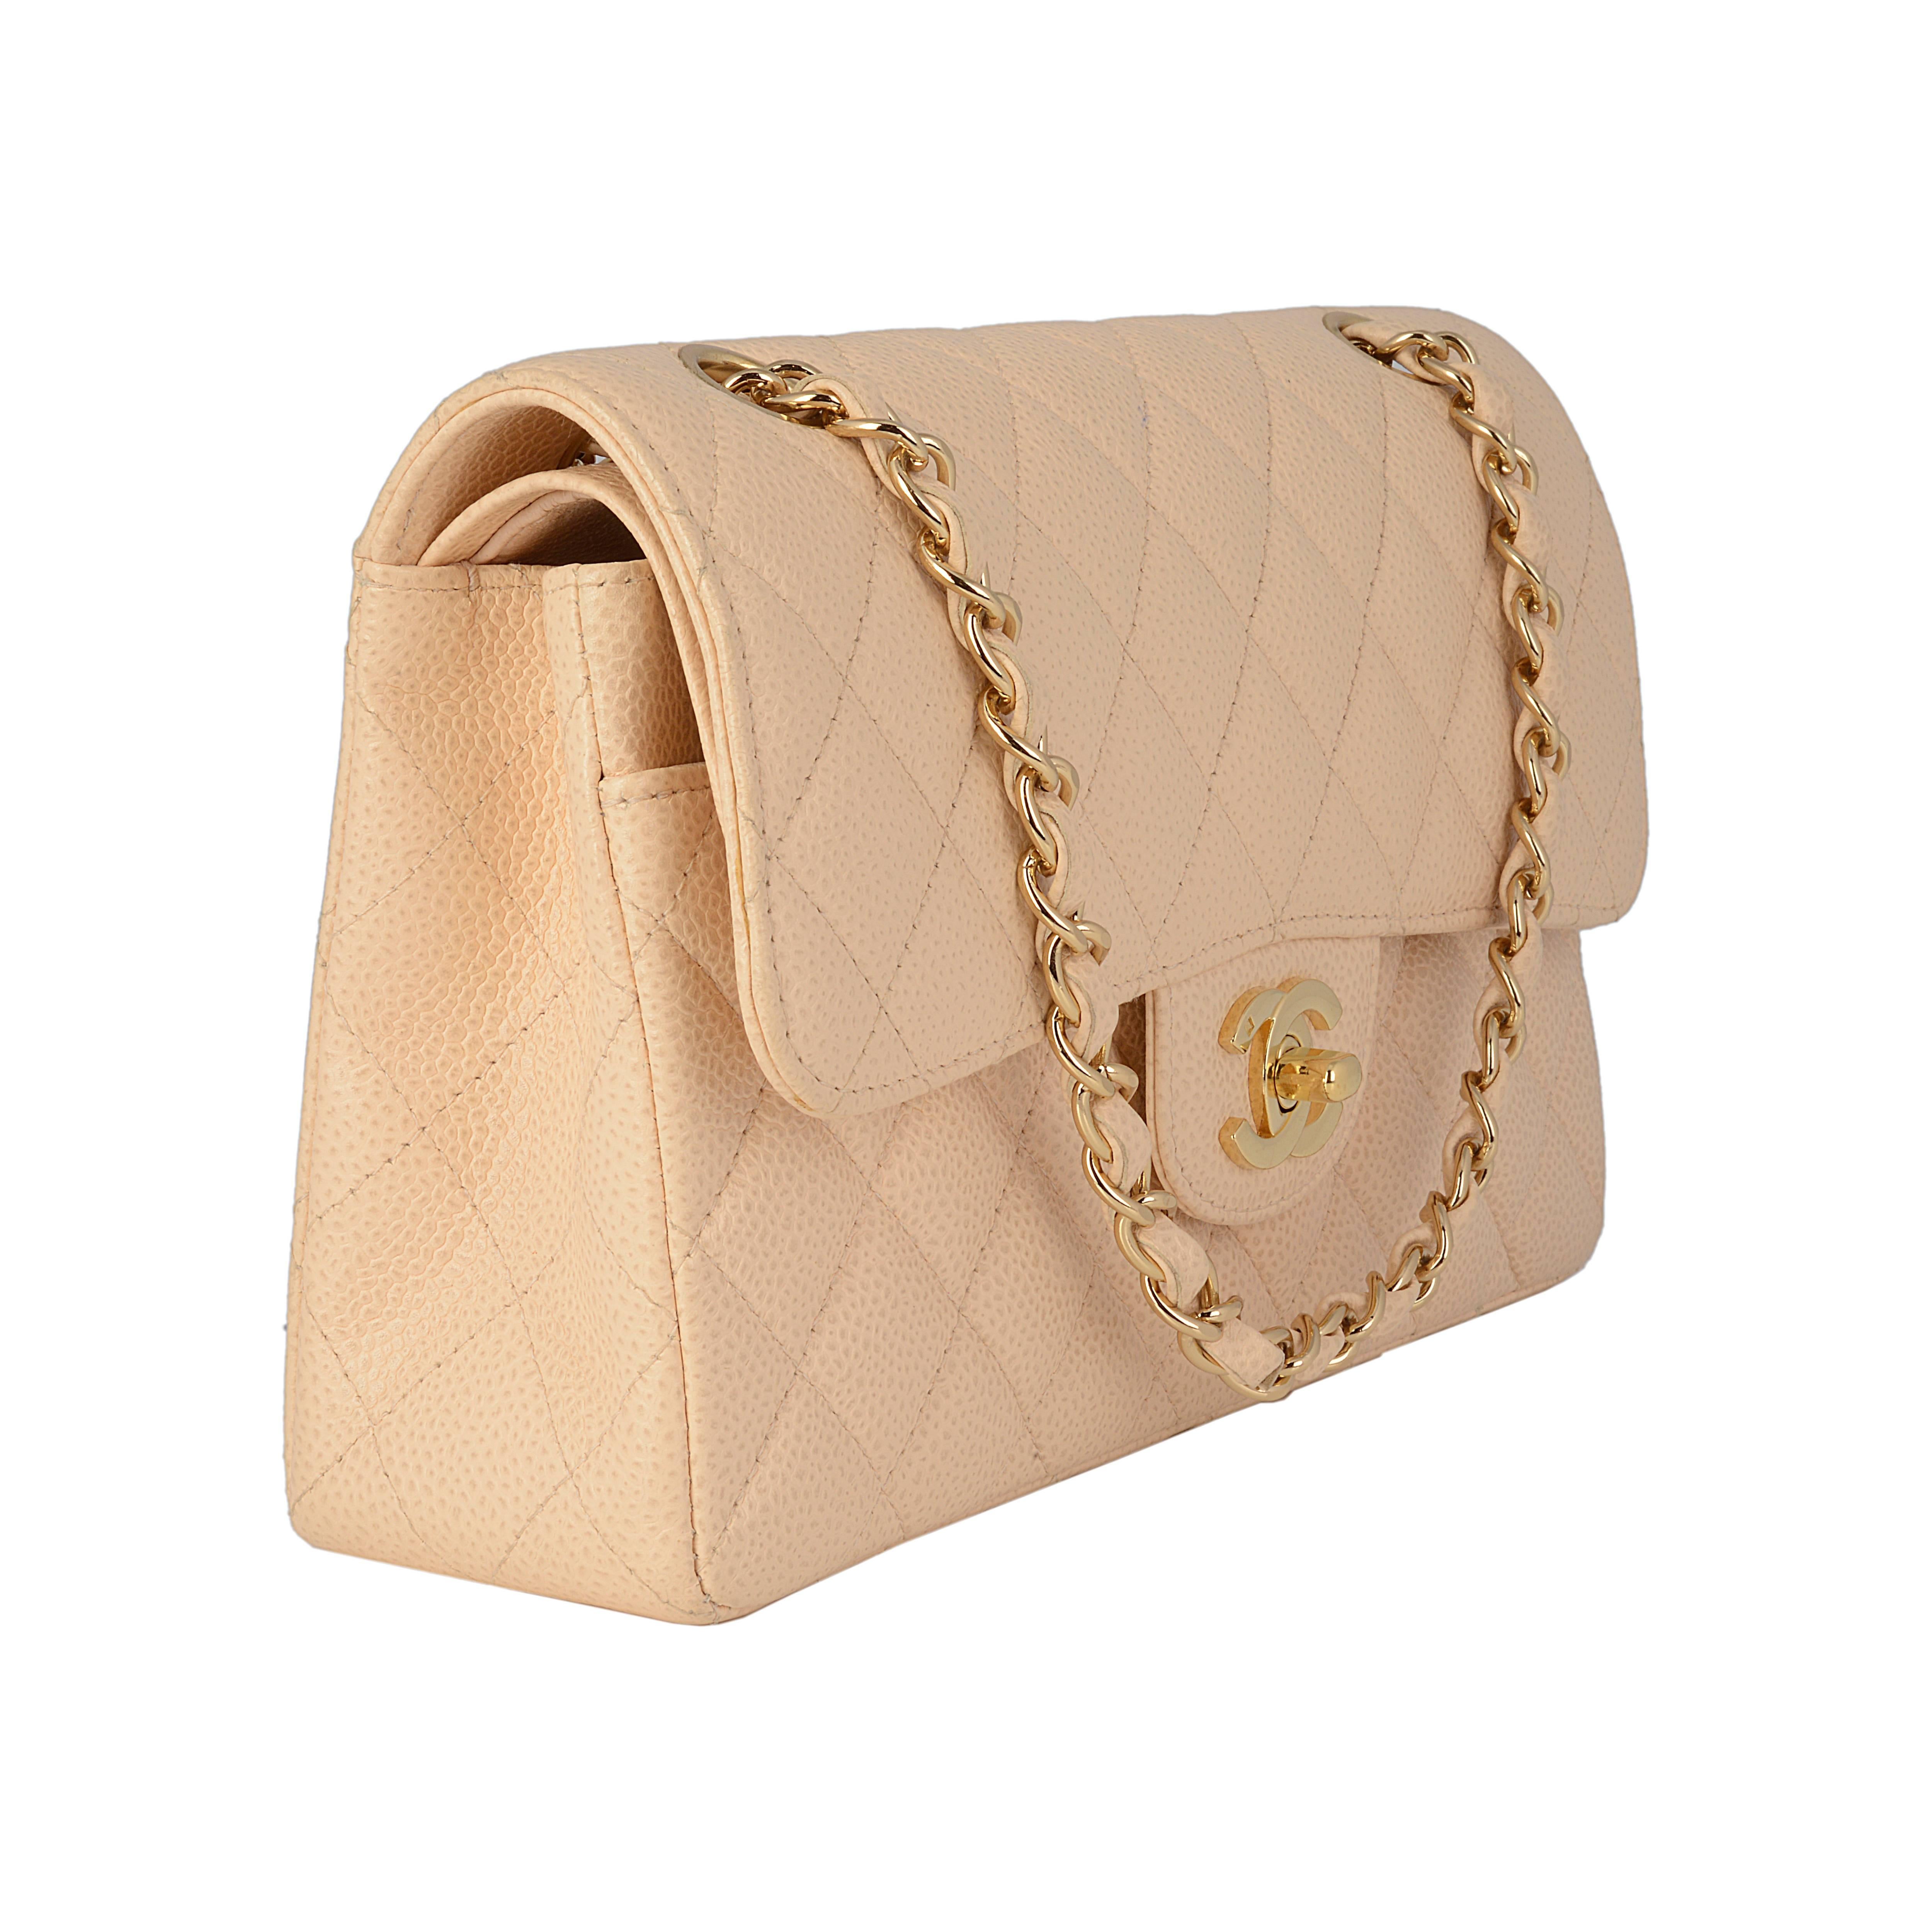 This timeless Chanel flap is crafted from durable quilted caviar leather and features a goldtone turnlock CC closure and double flap interior. The versatile leather strap chain can be worn on the shoulder or lengthened to wear with a longer drop.